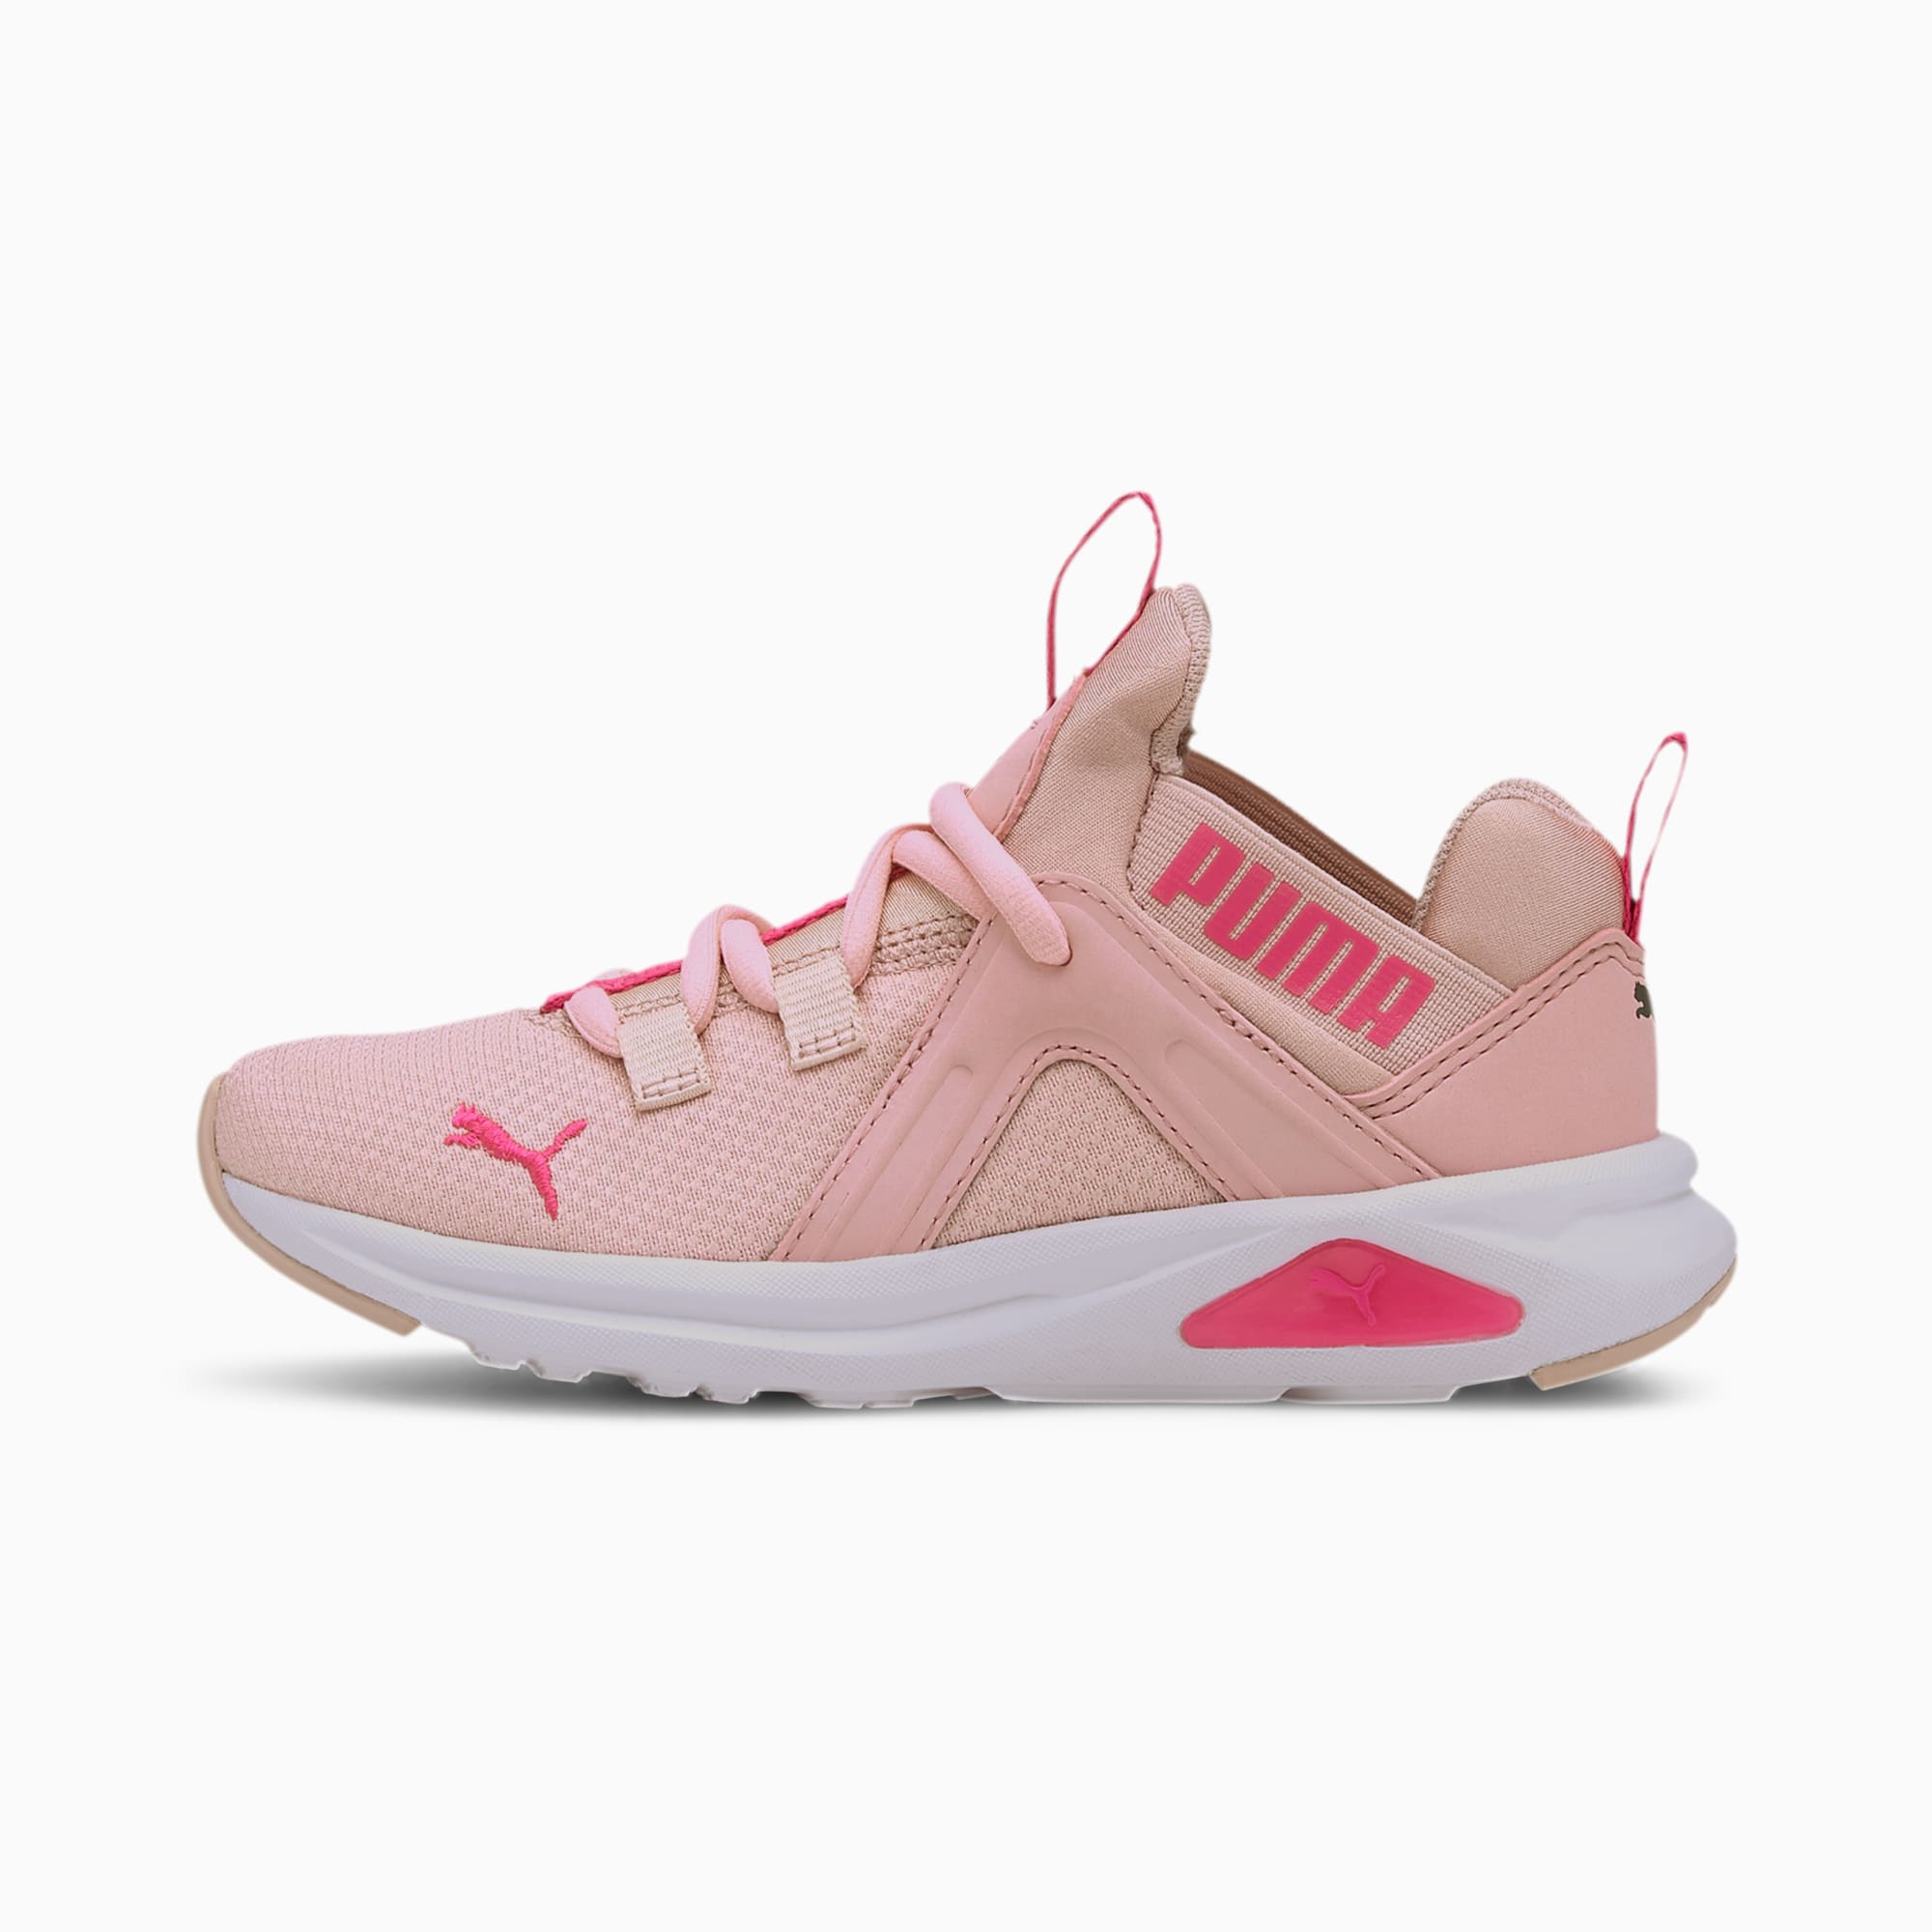 PUMA Chaussure Basket Enzo 2 Glow Kids pour Enfant, Rose, Taille 34, Chaussures